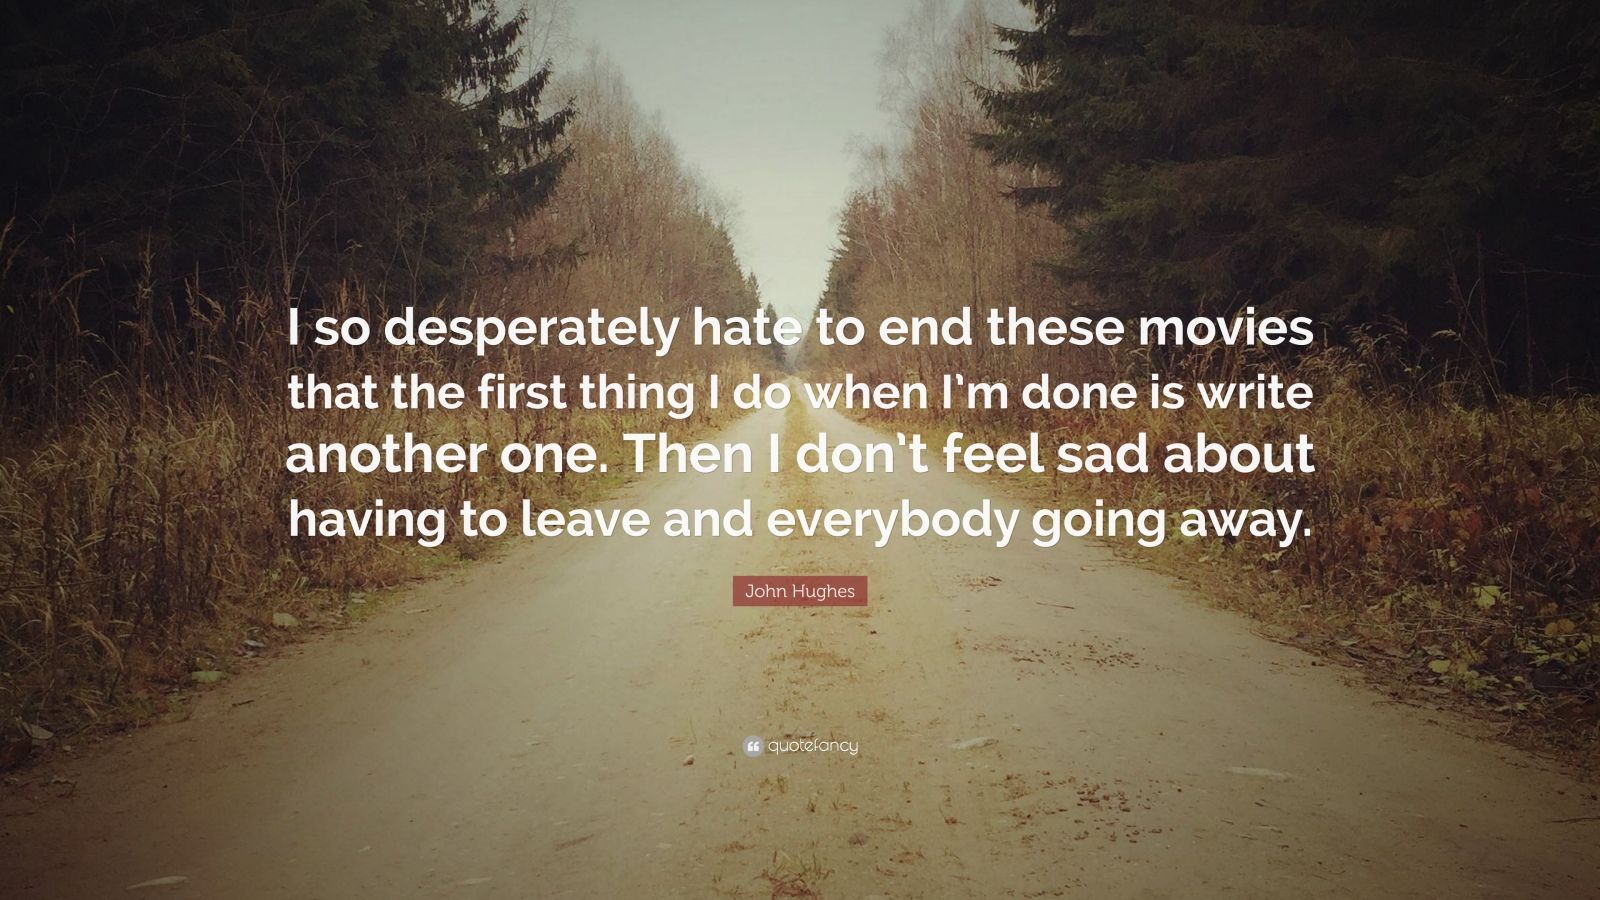 John Hughes Quote: "I so desperately hate to end these movies that the first thing I do when I'm ...